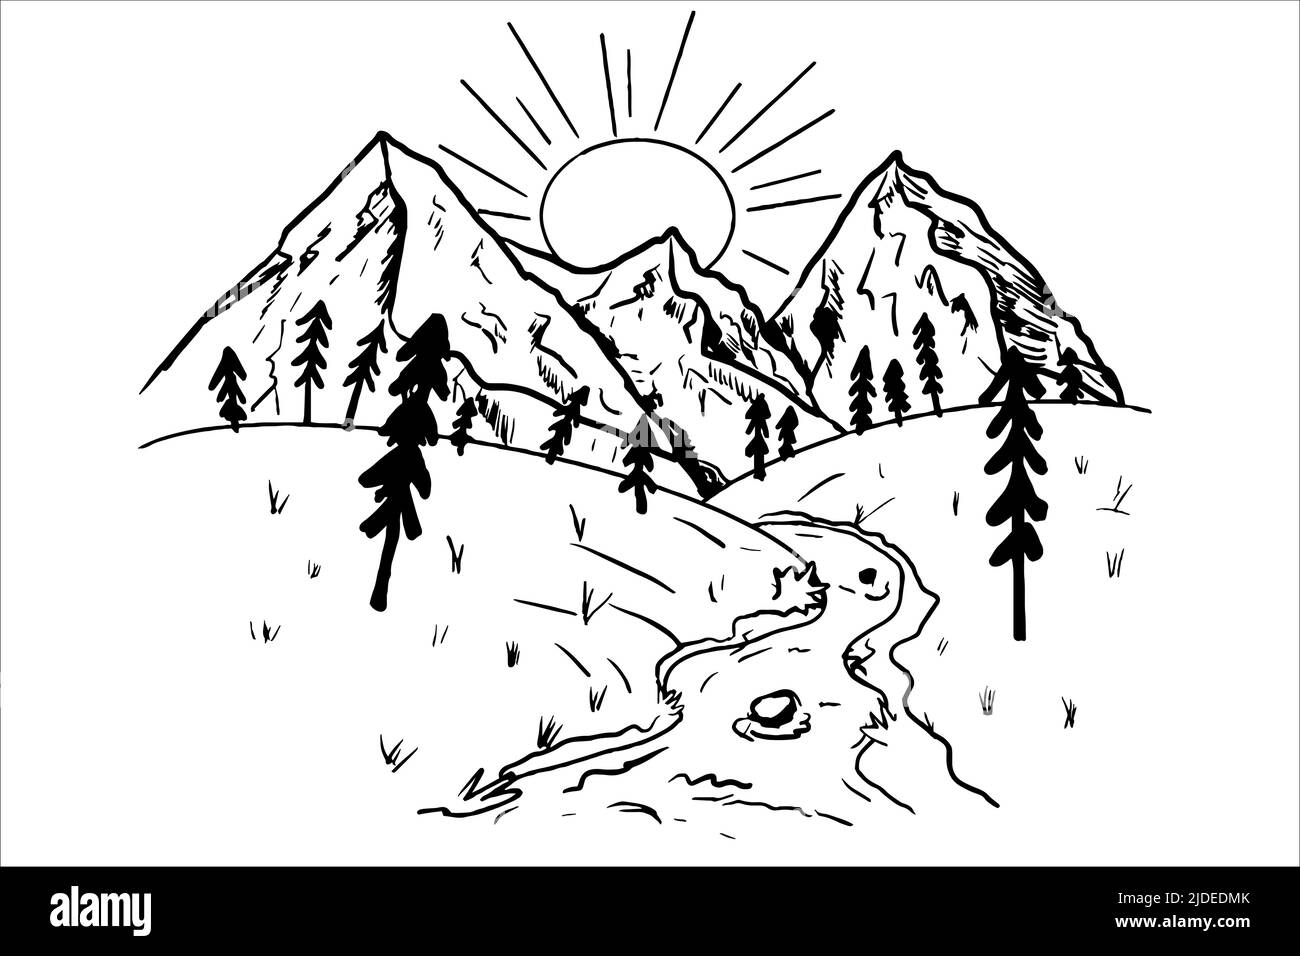 Line art hand drawn contour mountain landscape scenery isolated on white background. Art illustration, stylish in black, ink colour. . Vector illustration Stock Vector